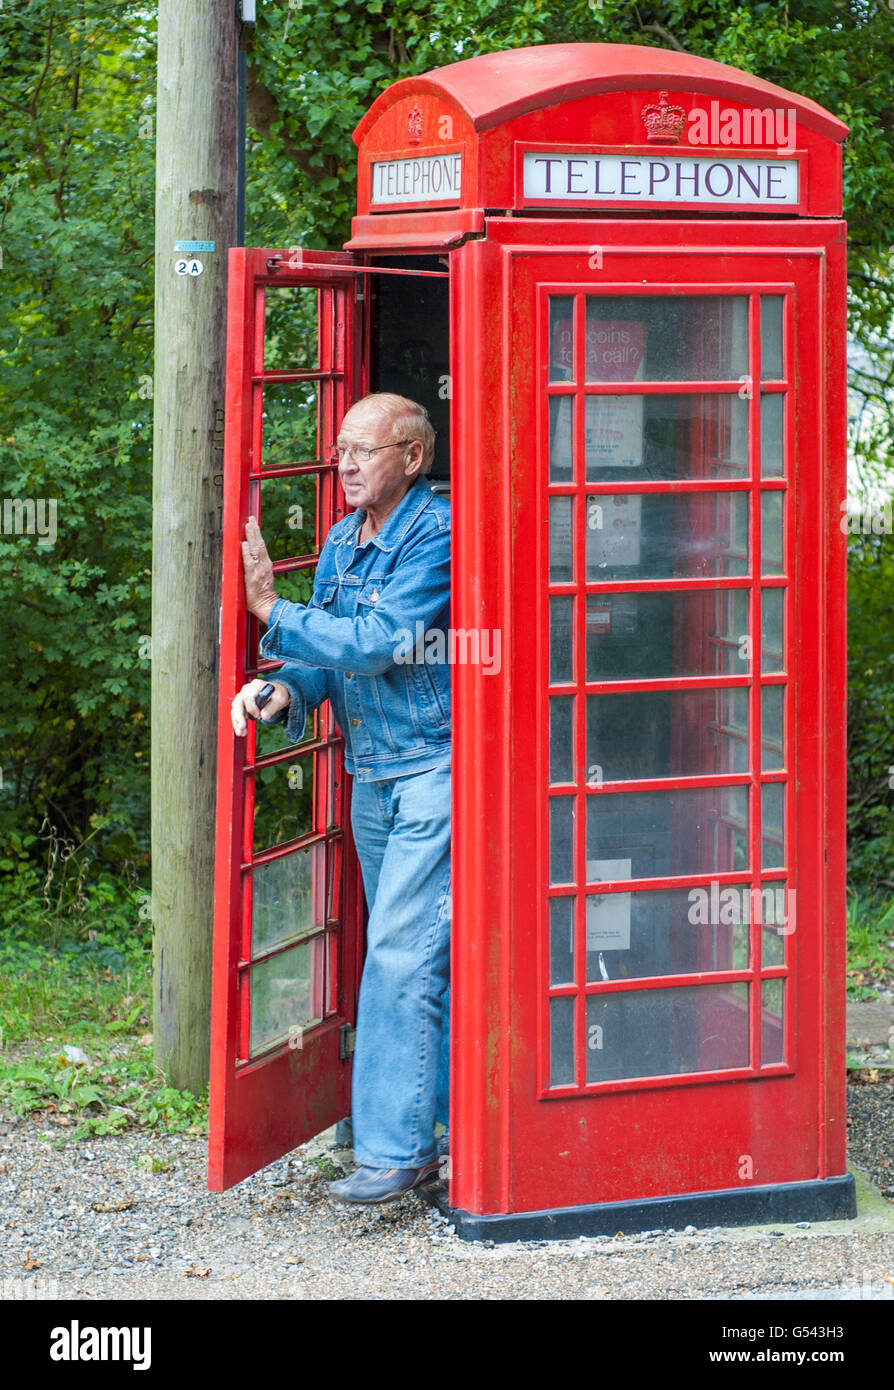 man-walking-out-of-an-old-style-british-red-telephone-box-in-amberley-G543H3.jpg